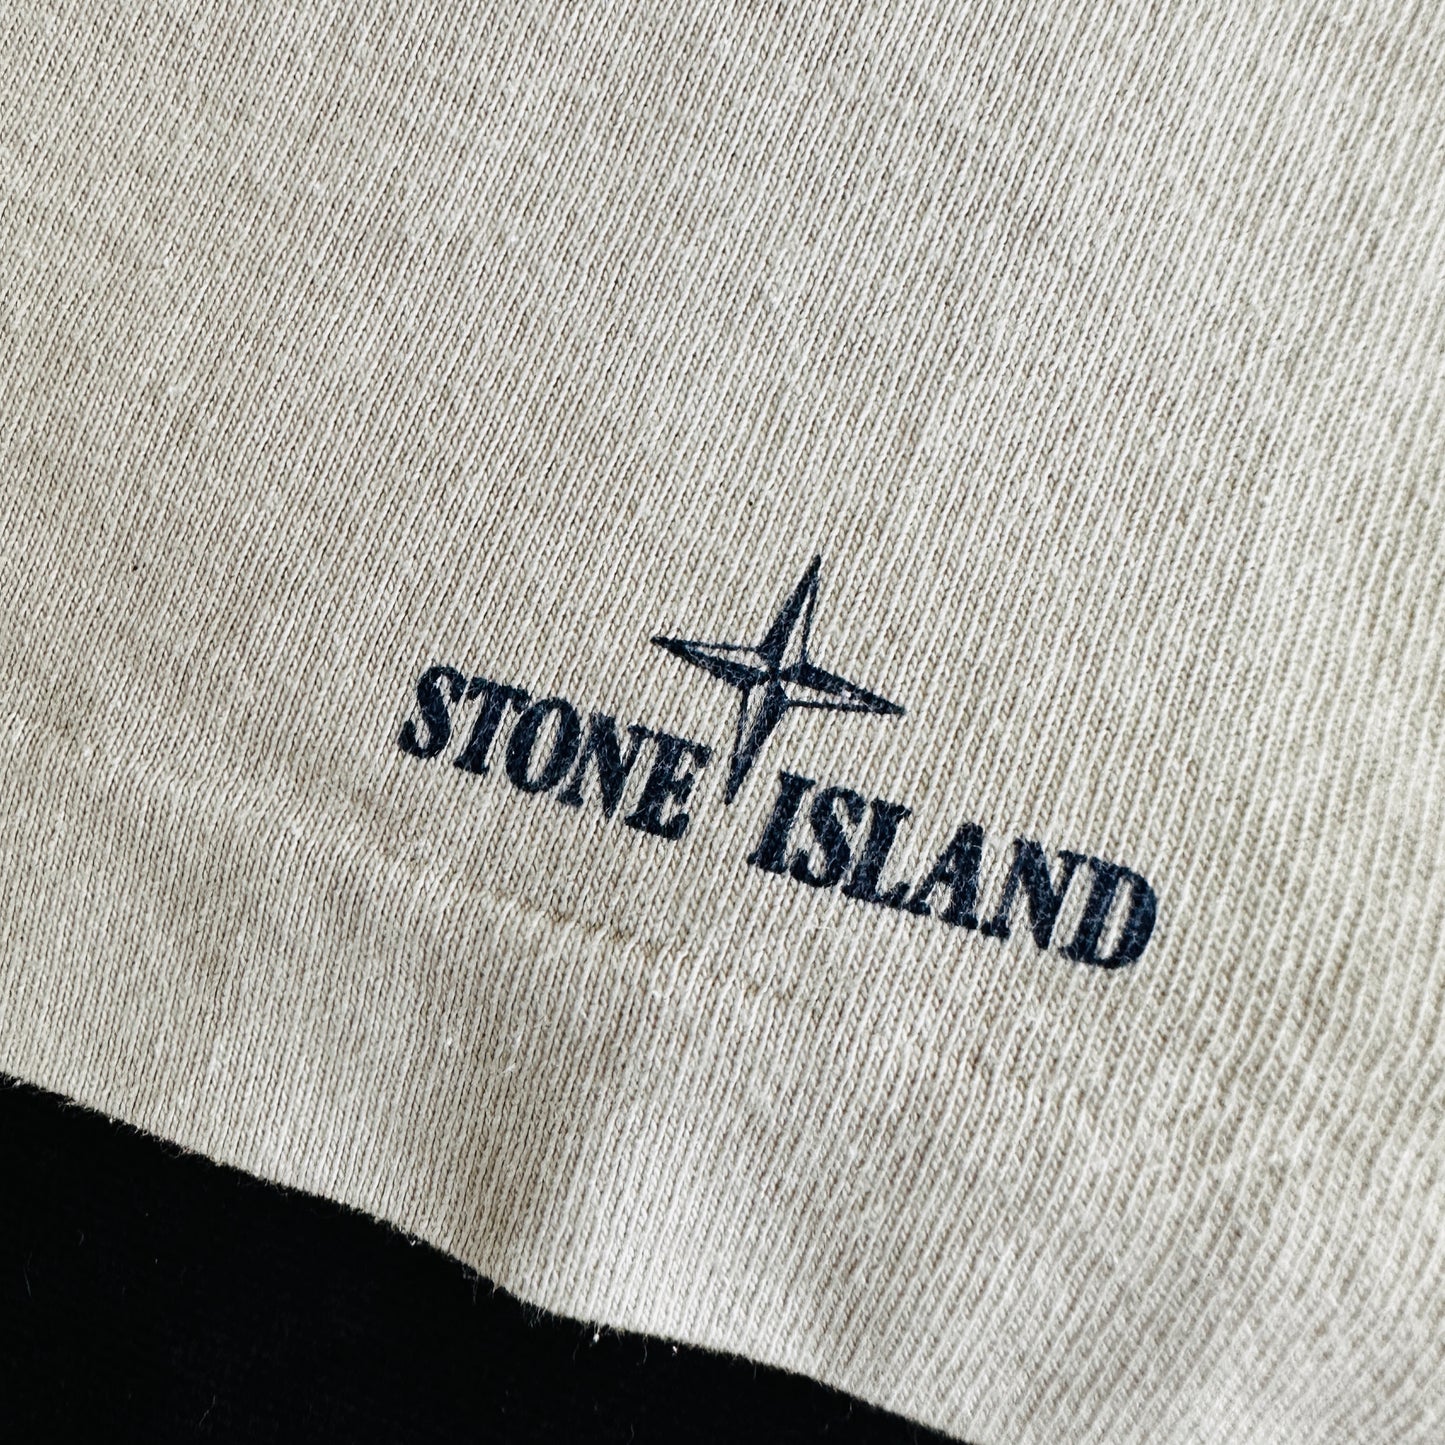 Stone Island Vintage 80s Metal Button Henley T-Shirt - L - Made in Italy